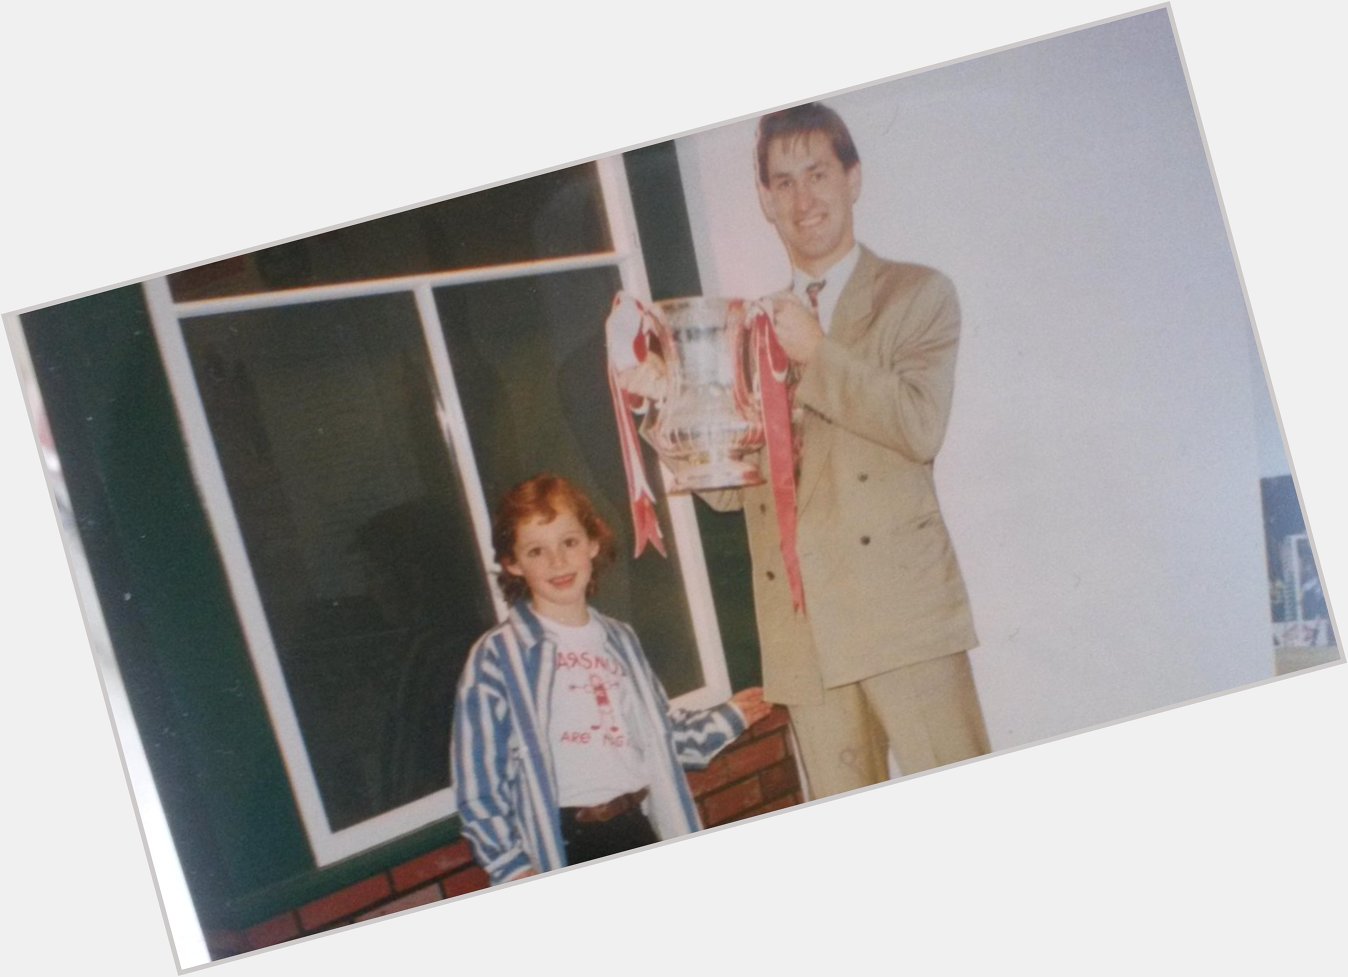 My childhood hero and best ever captain. happy birthday Tony Adams (the real guy, not the cardboard cutout) 